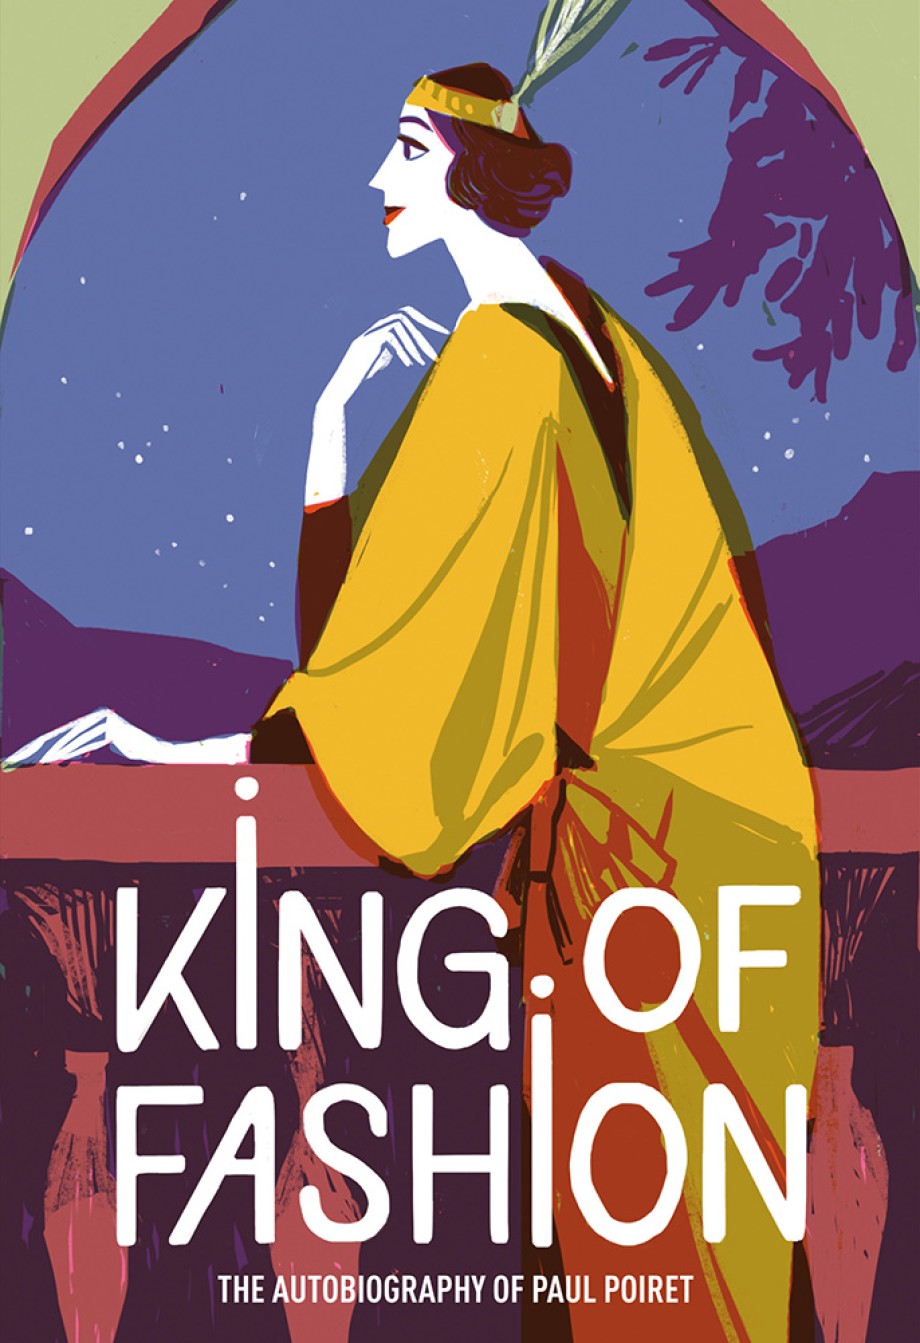 King of Fashion The Autobiography of Paul Poiret